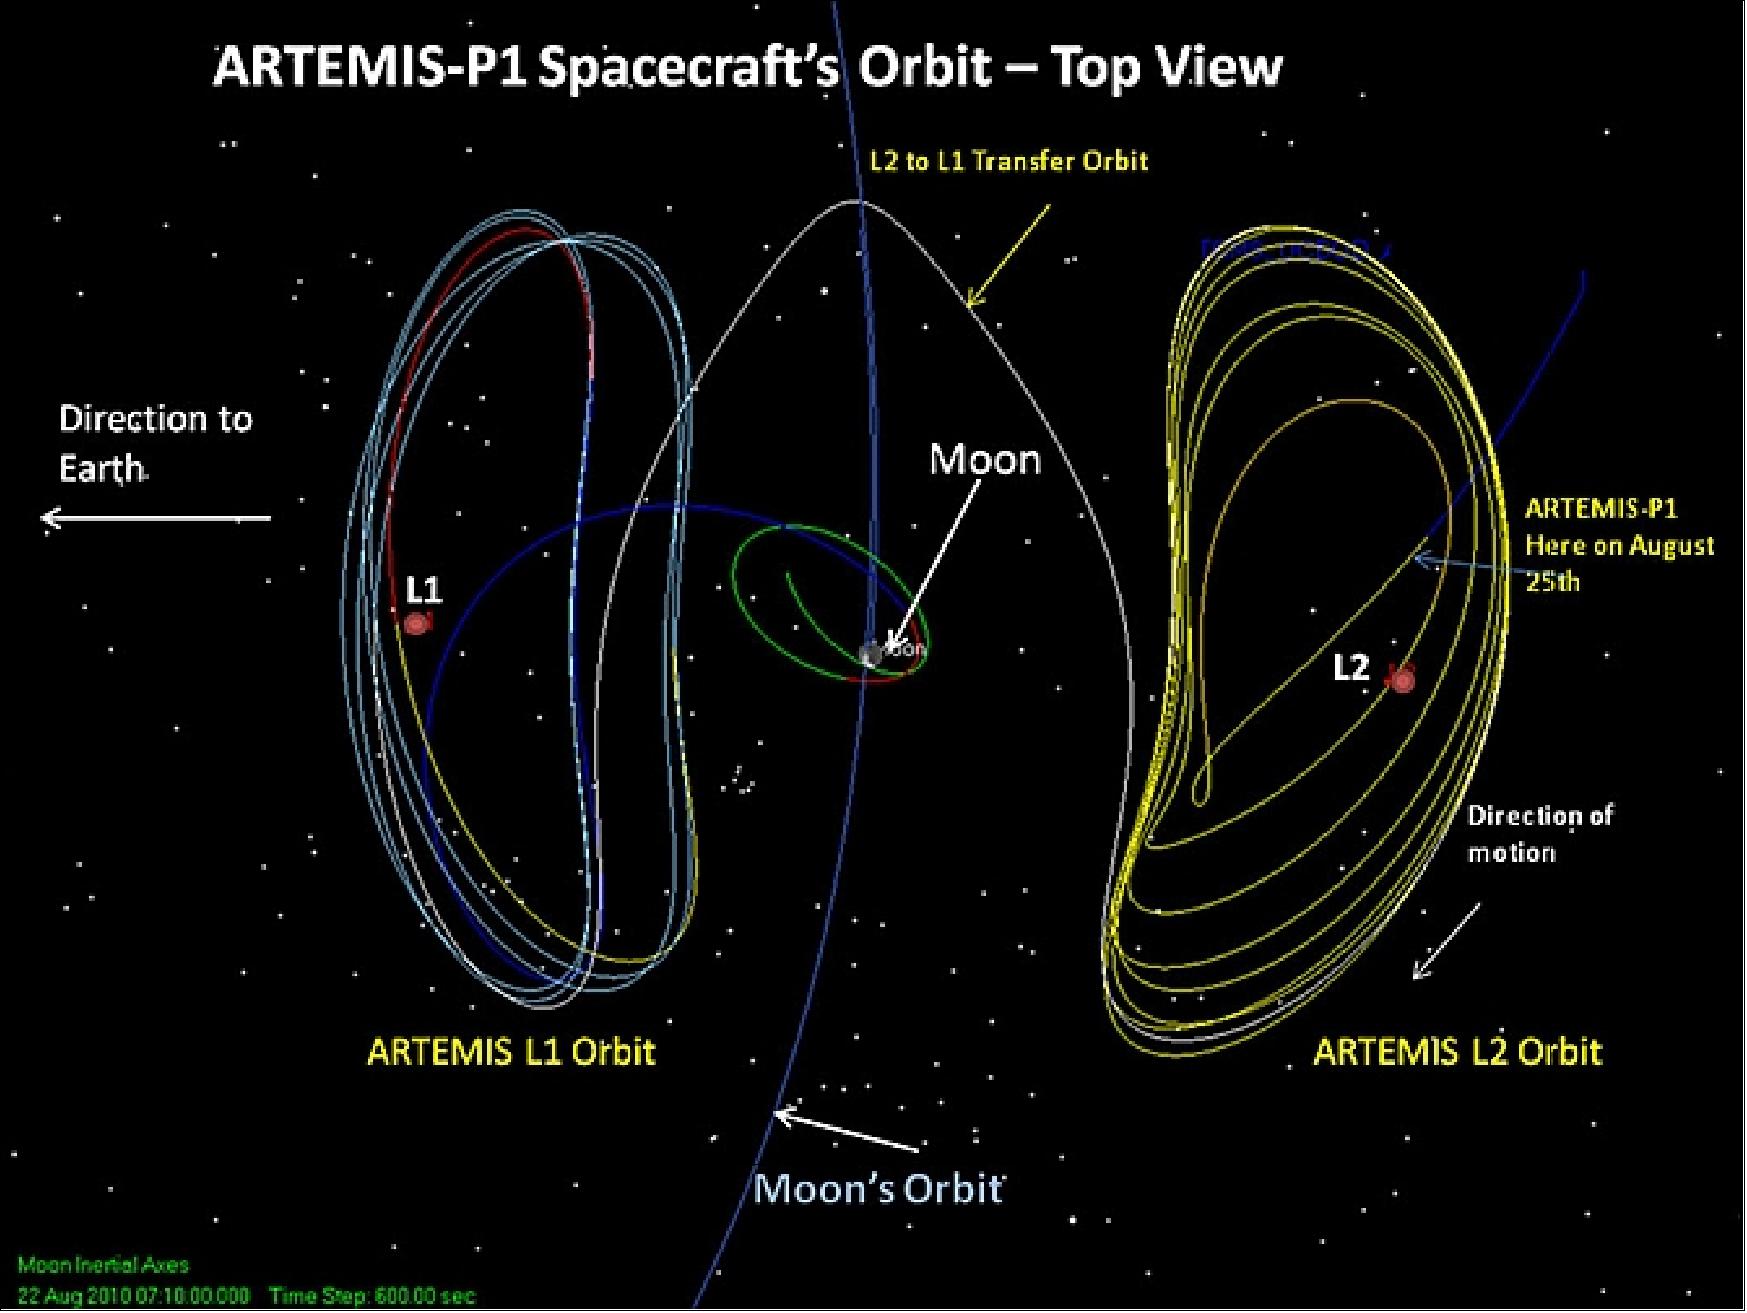 Figure 43: The view from above of the ARTEMIS orbits as they make the transition from the kidney-shaped Lissajous orbits on either side of the moon to orbiting around the moon (image credit: NASA/GSFC)